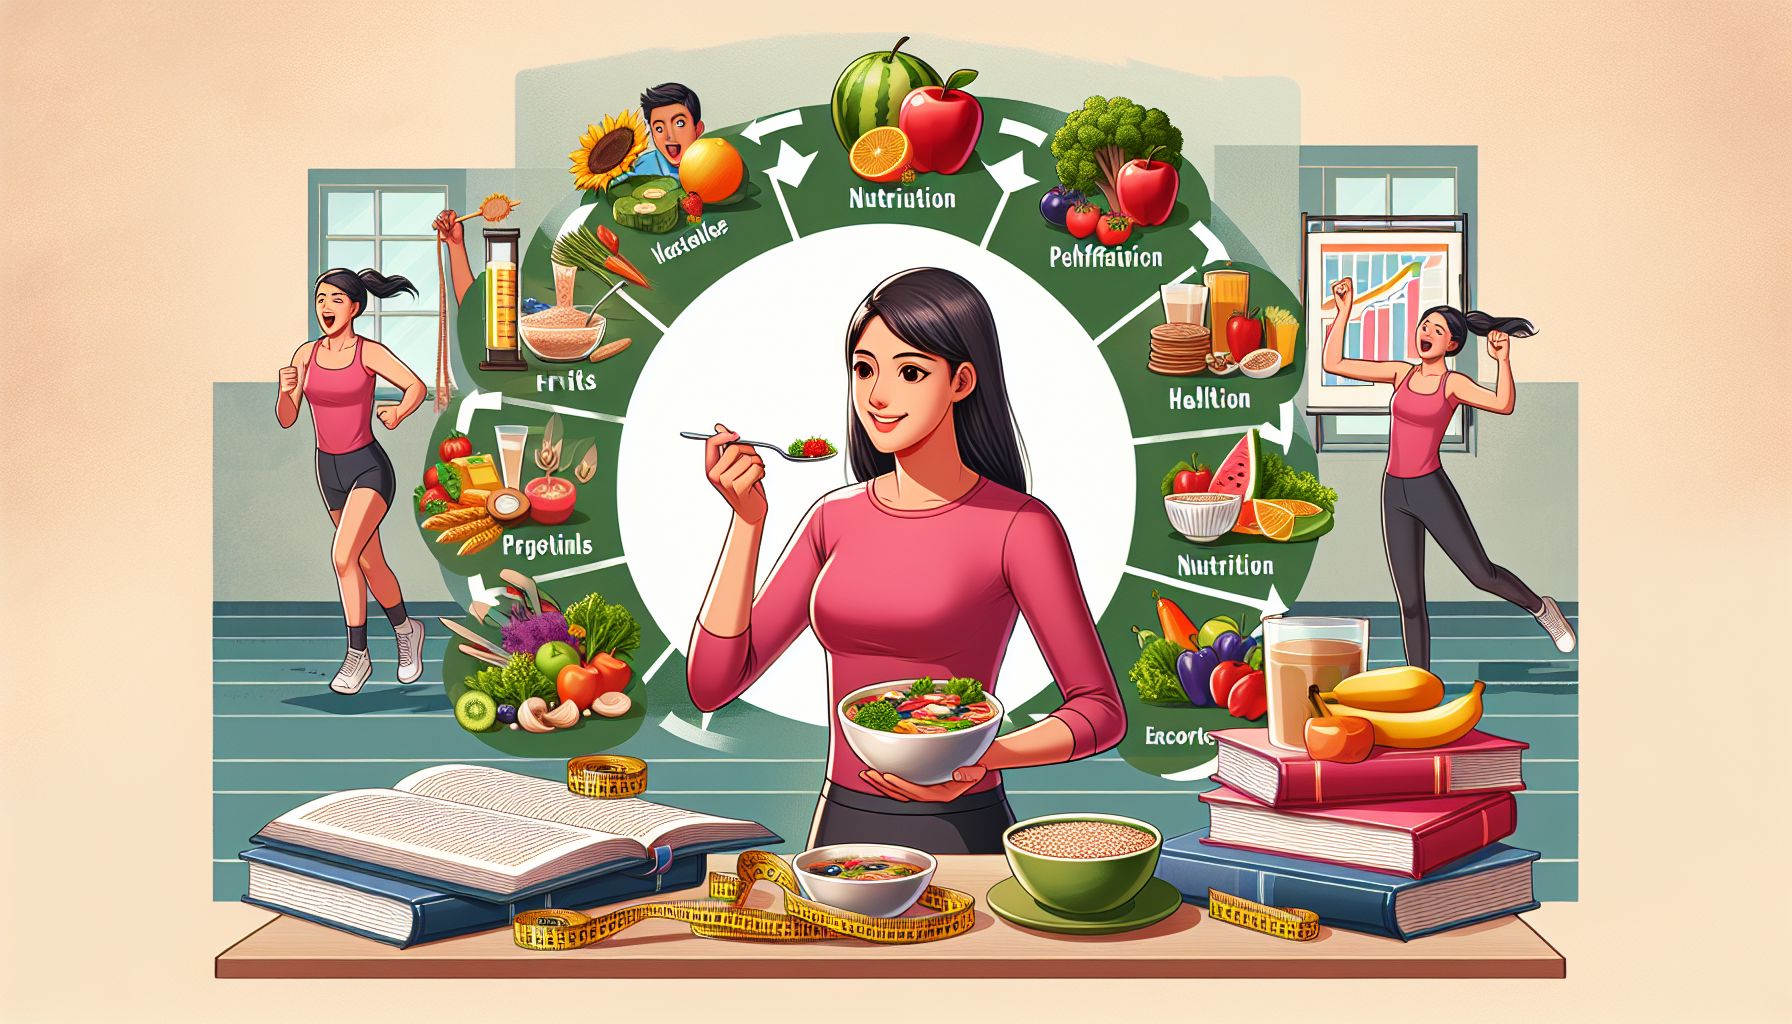 The Impact of Nutritional Education on A Student’s Health and Performance